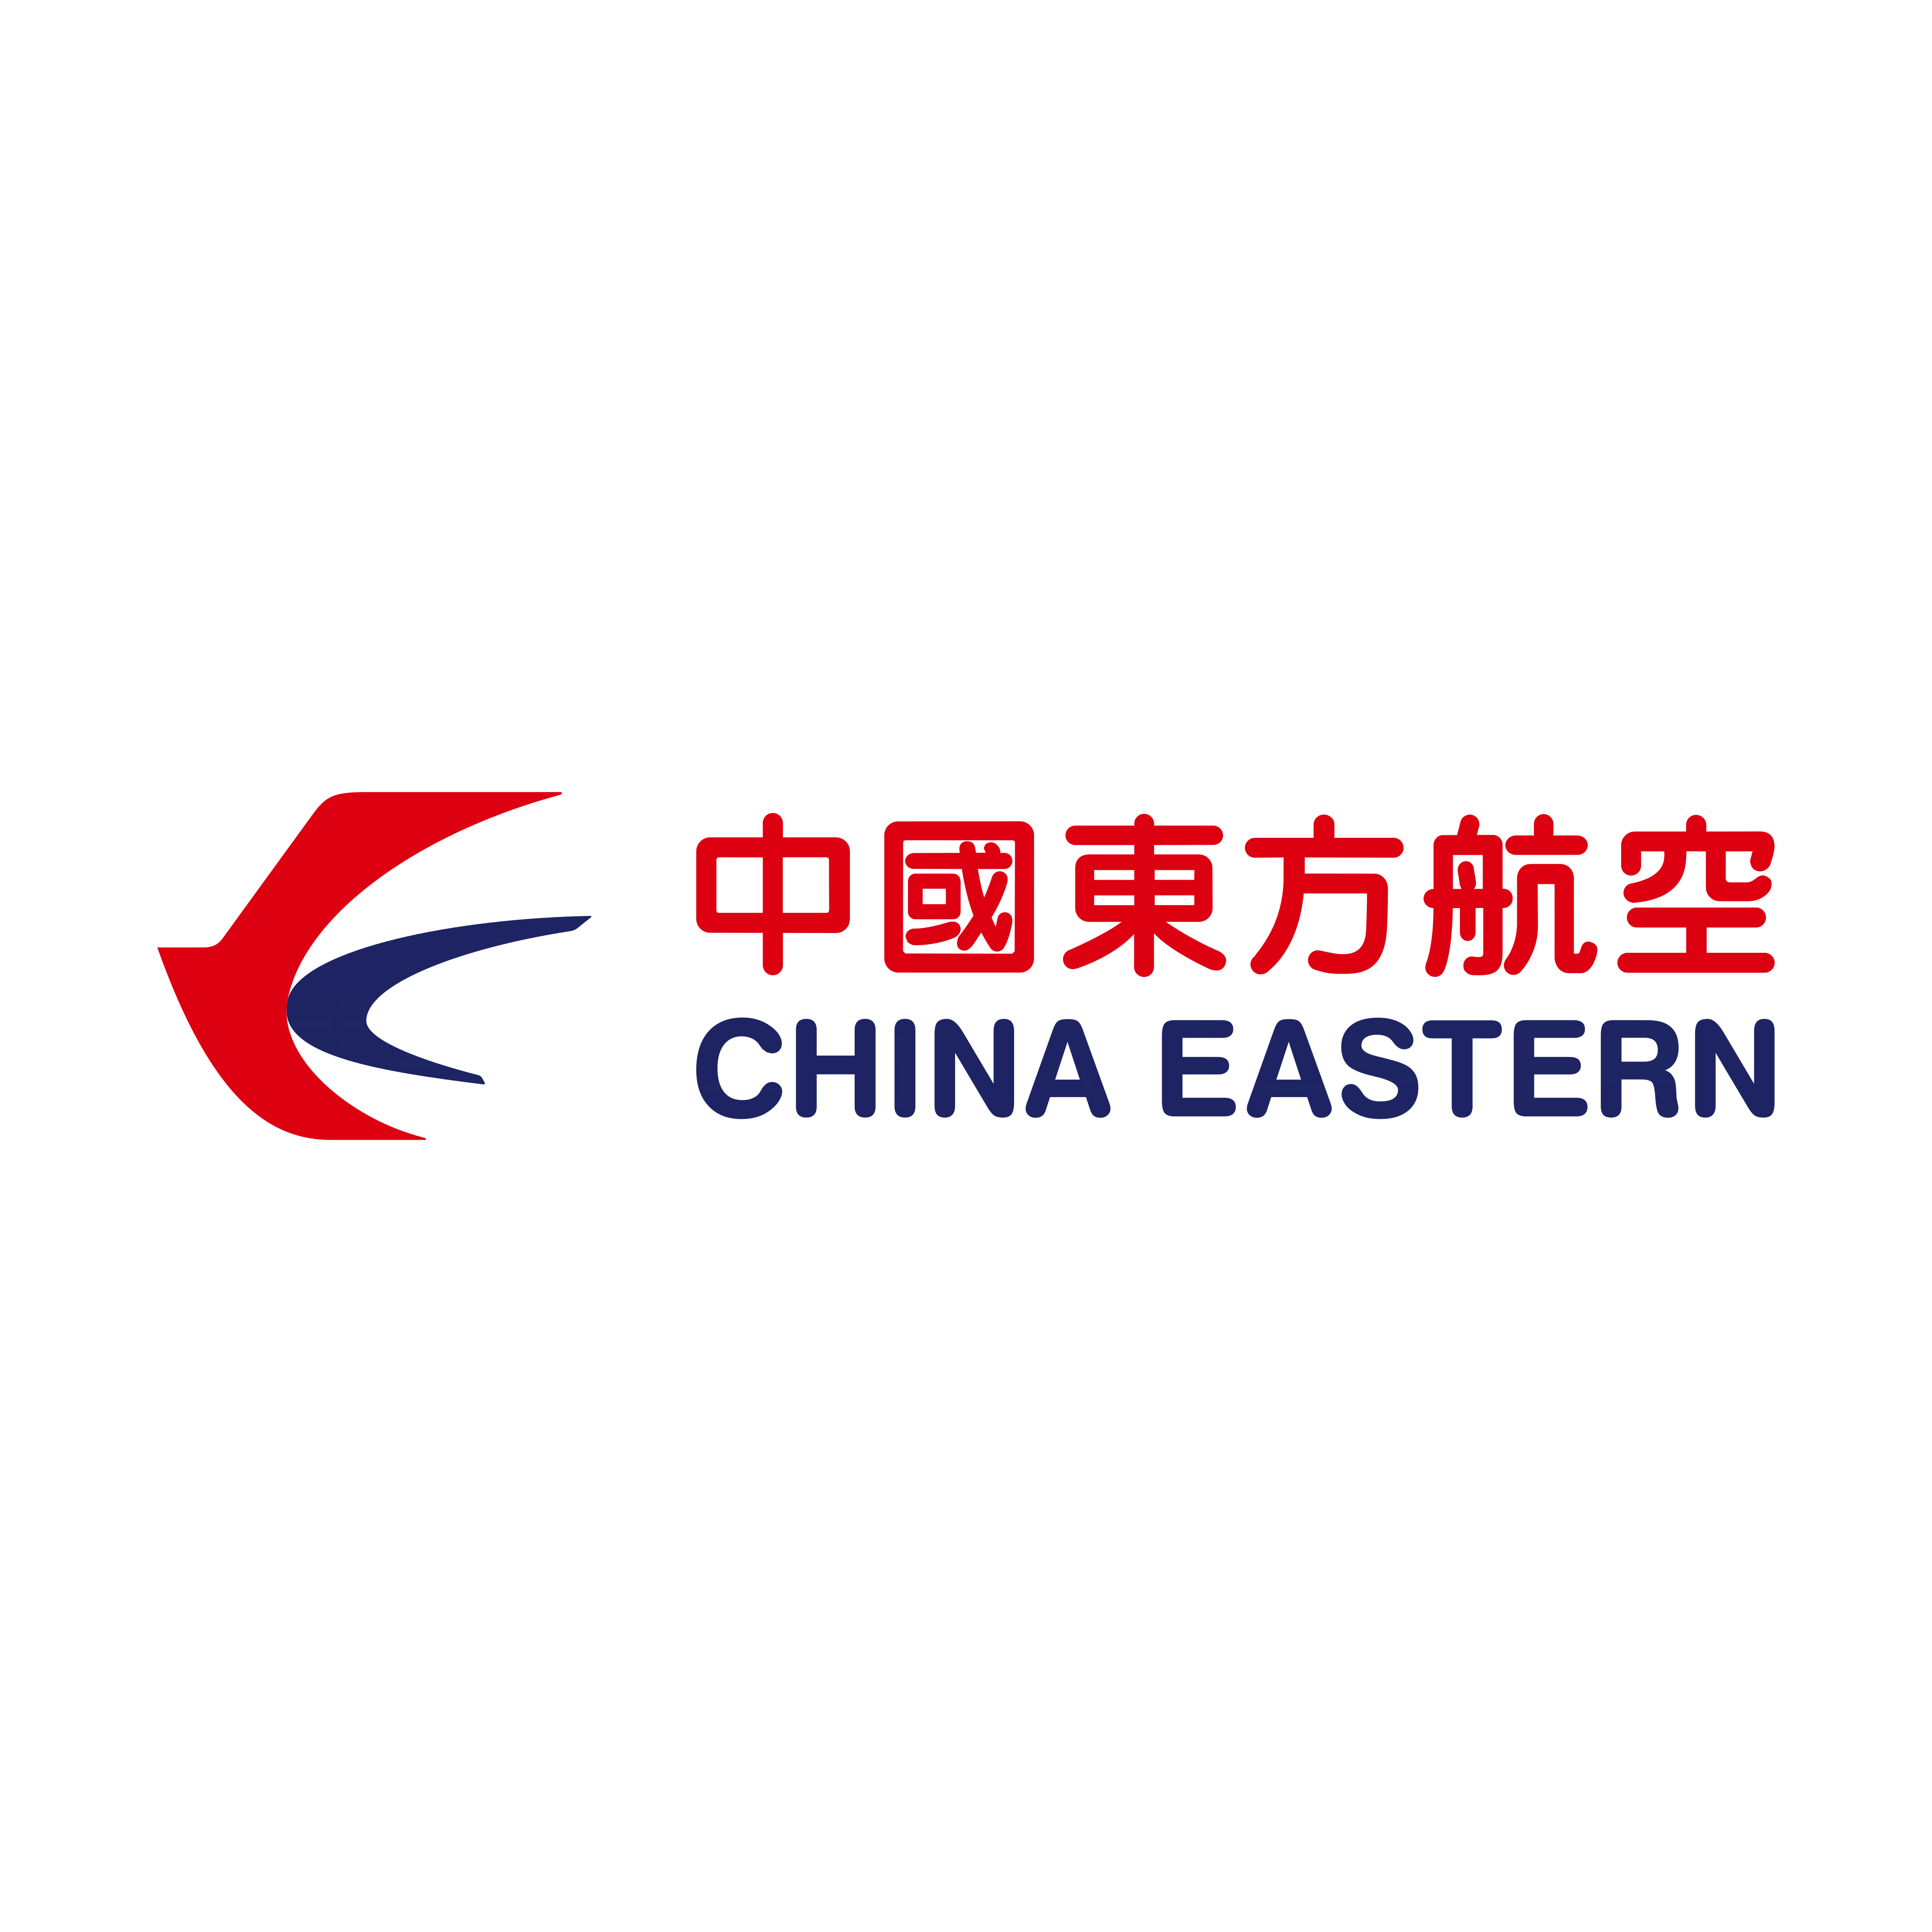 China Eastern Airlines Logo PNG.